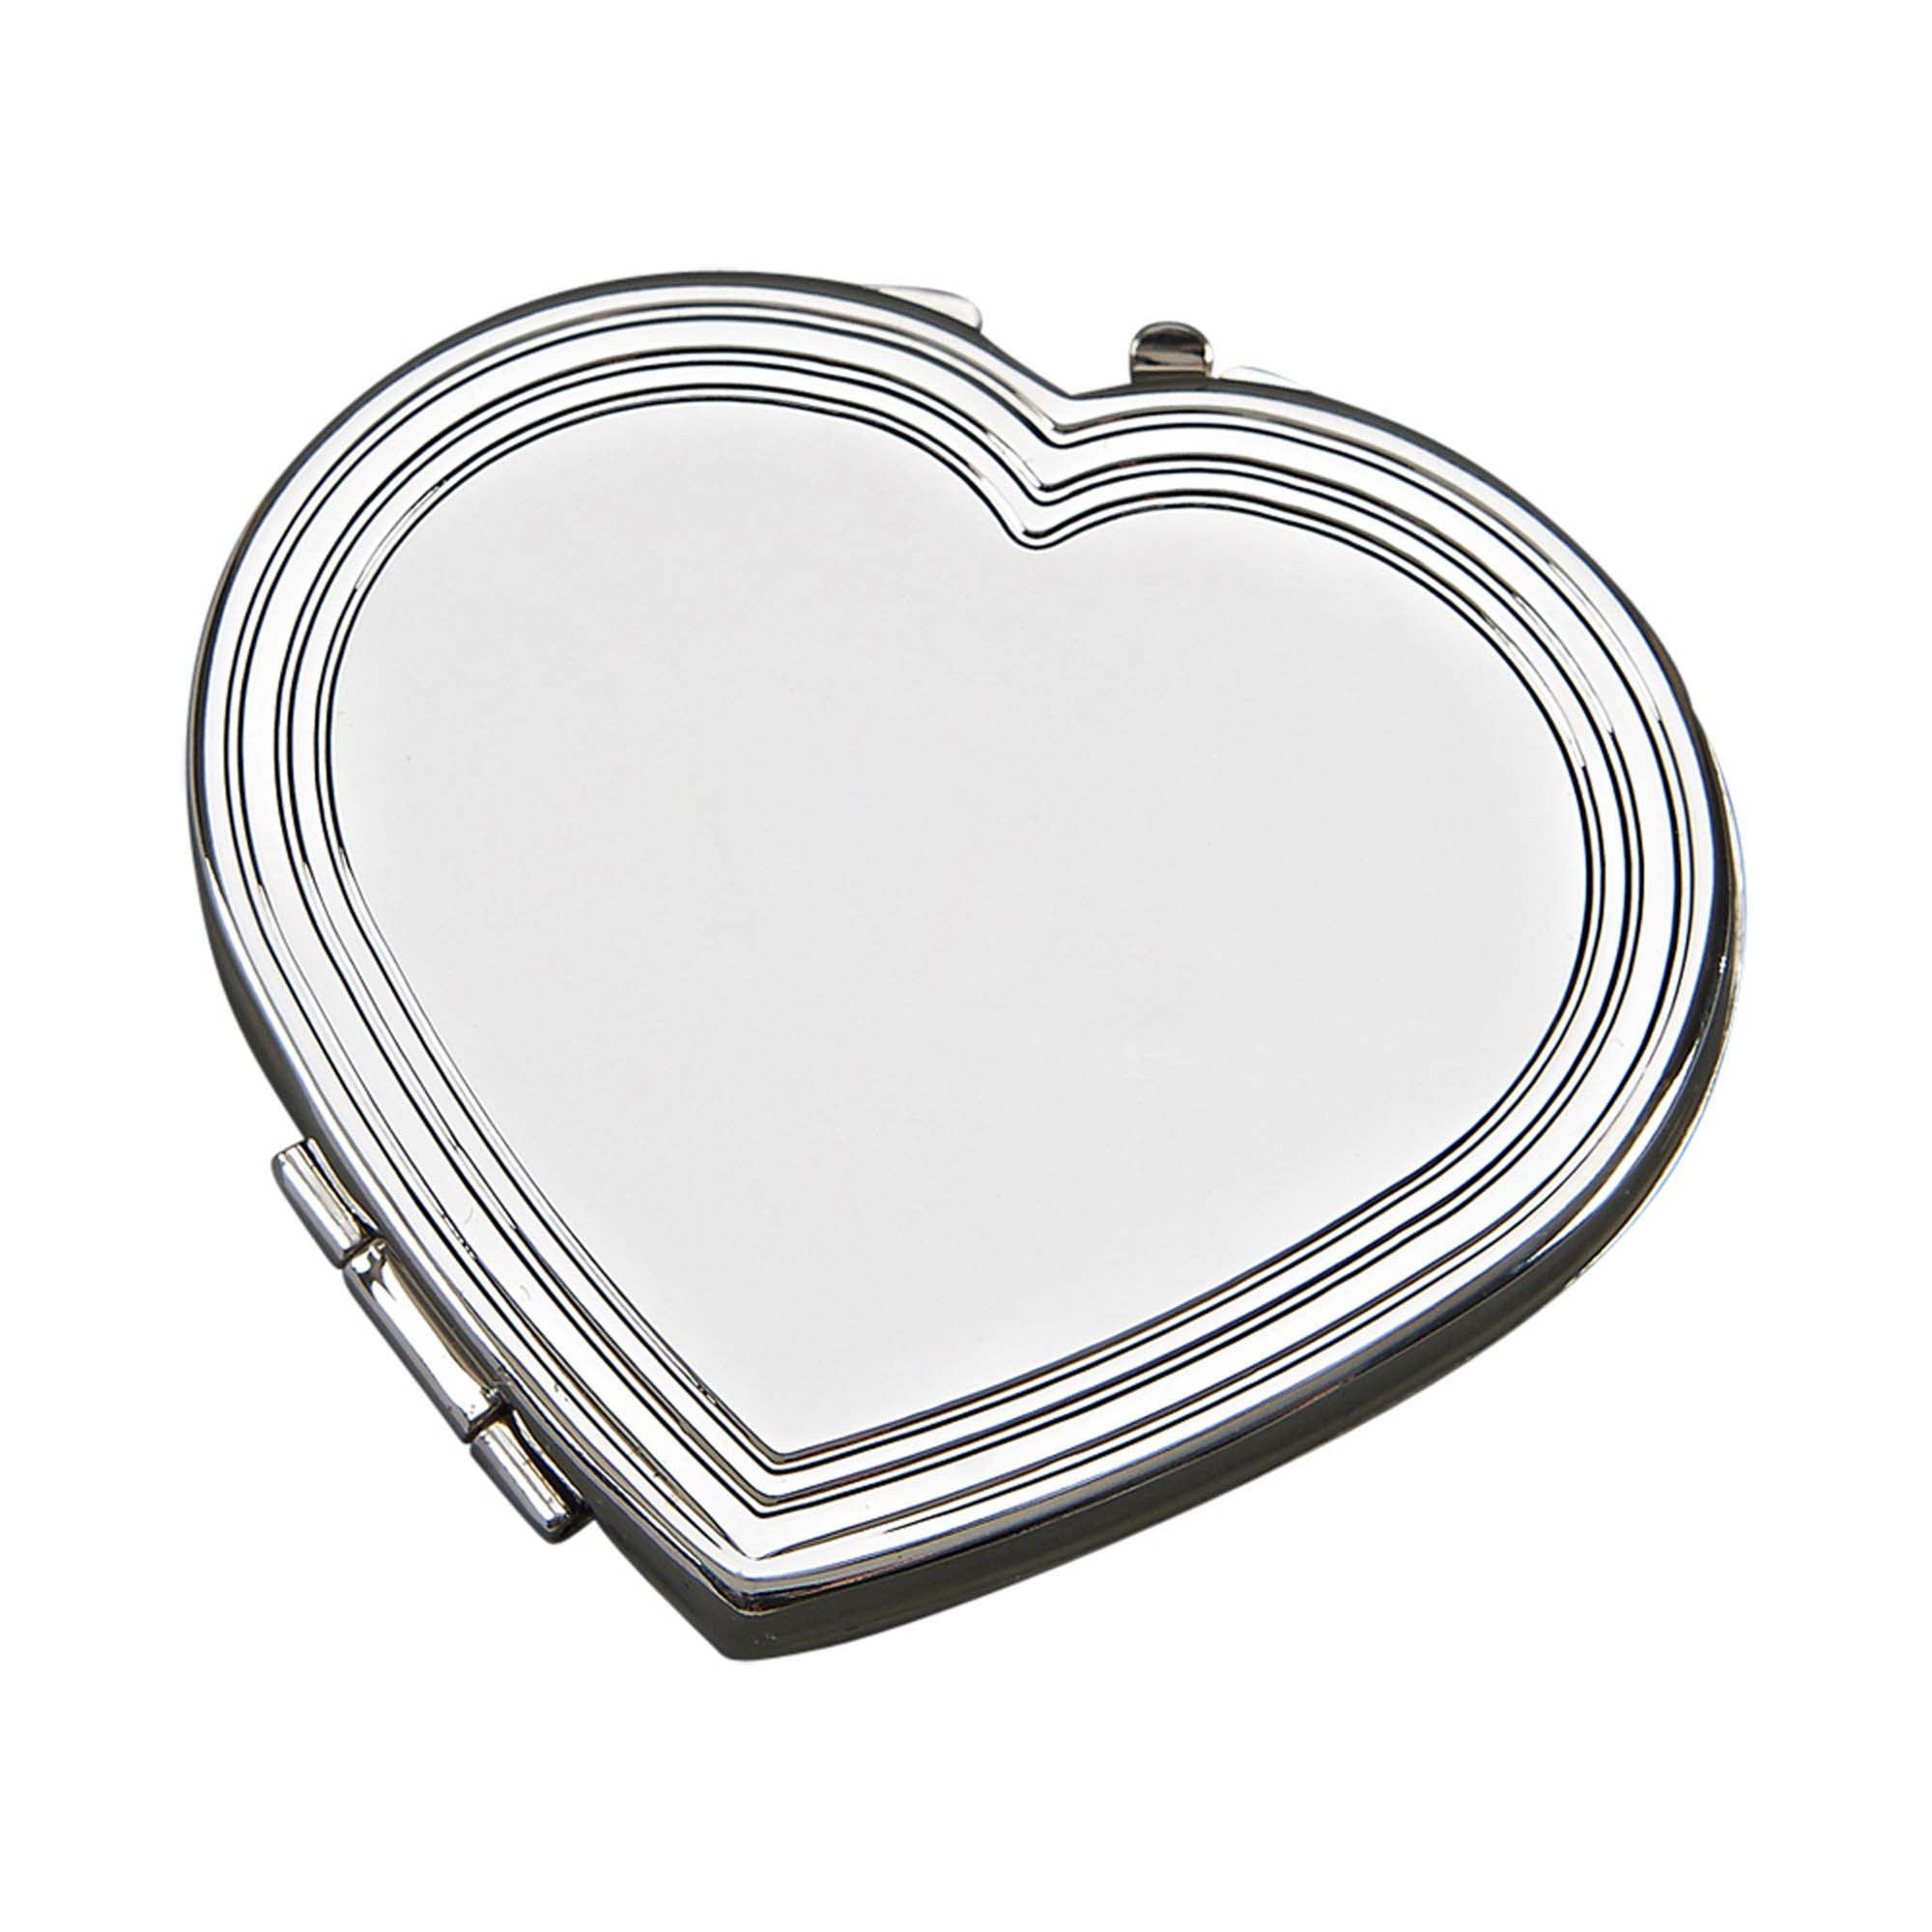 2.25 X 2 In. Silhouette Heart Compact, Nickel Plated - Silver